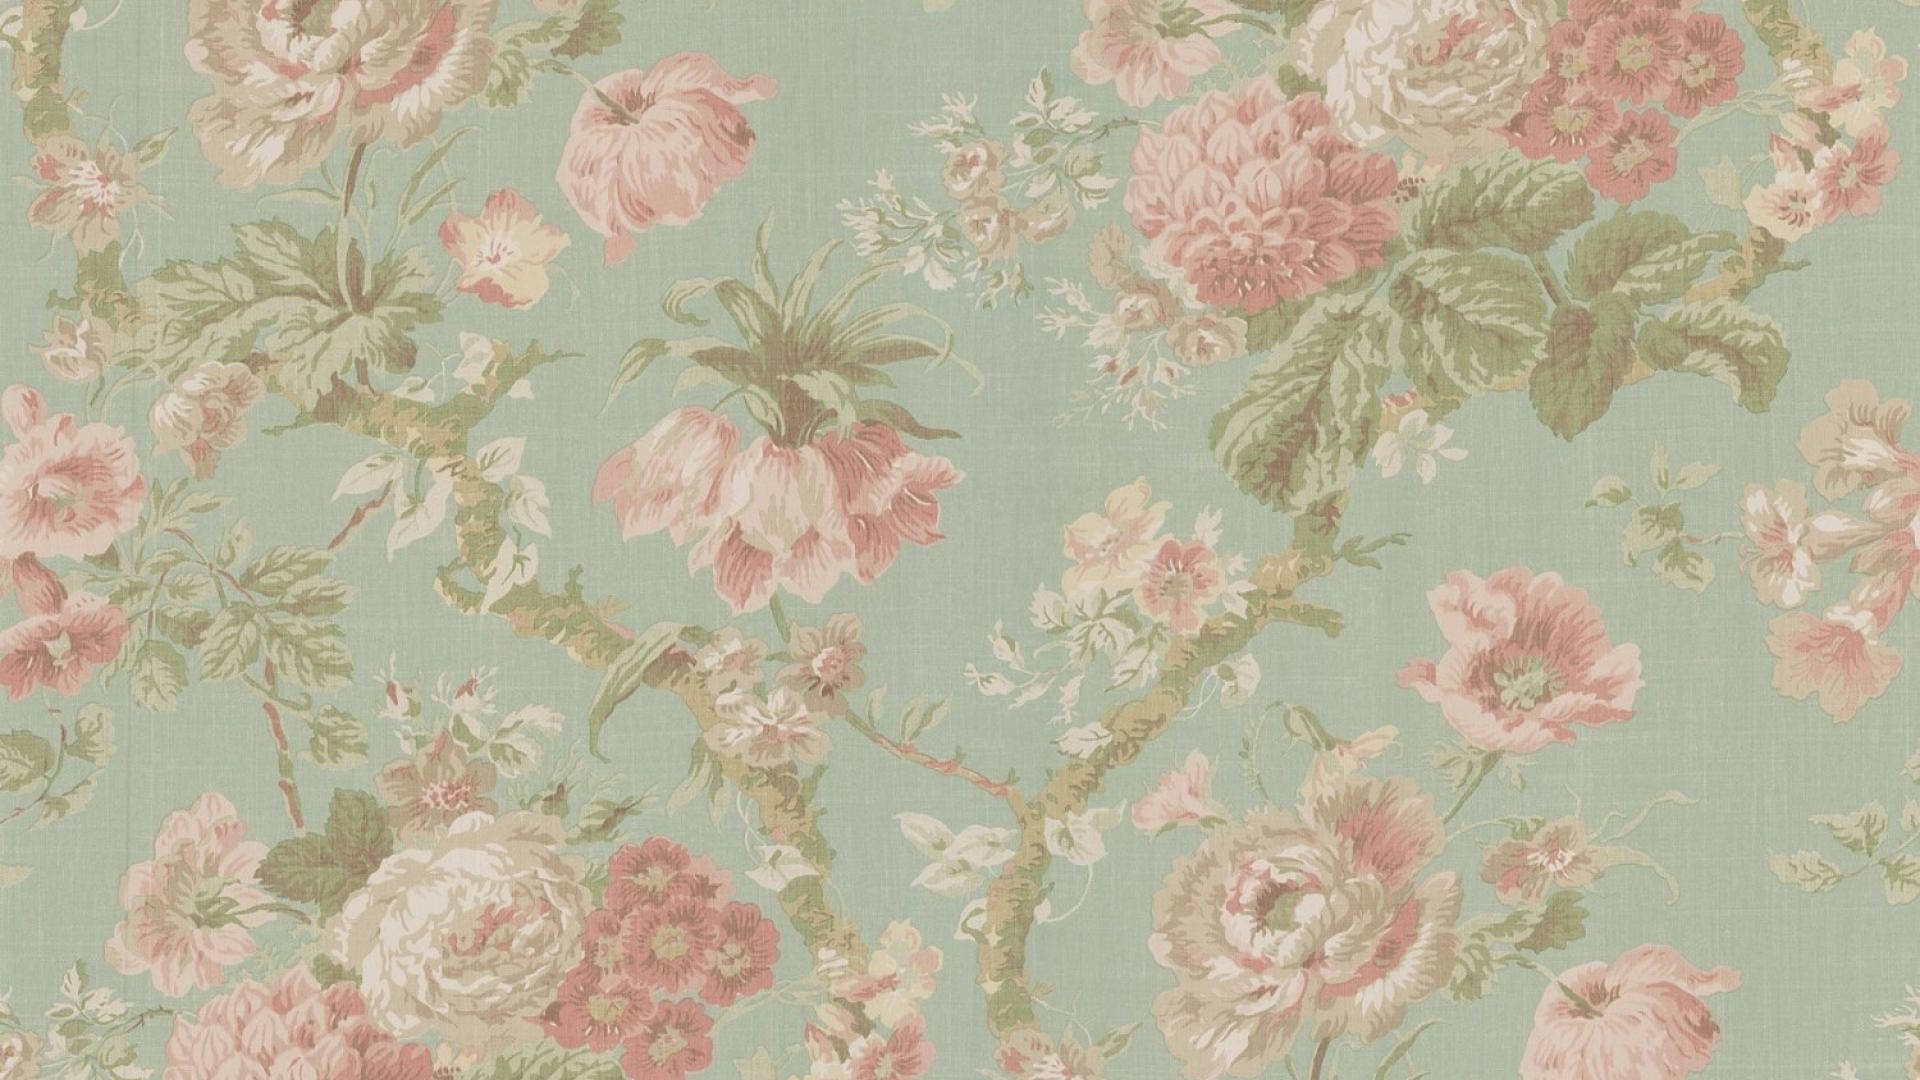 Coquette Vintage Pink Flowers Background